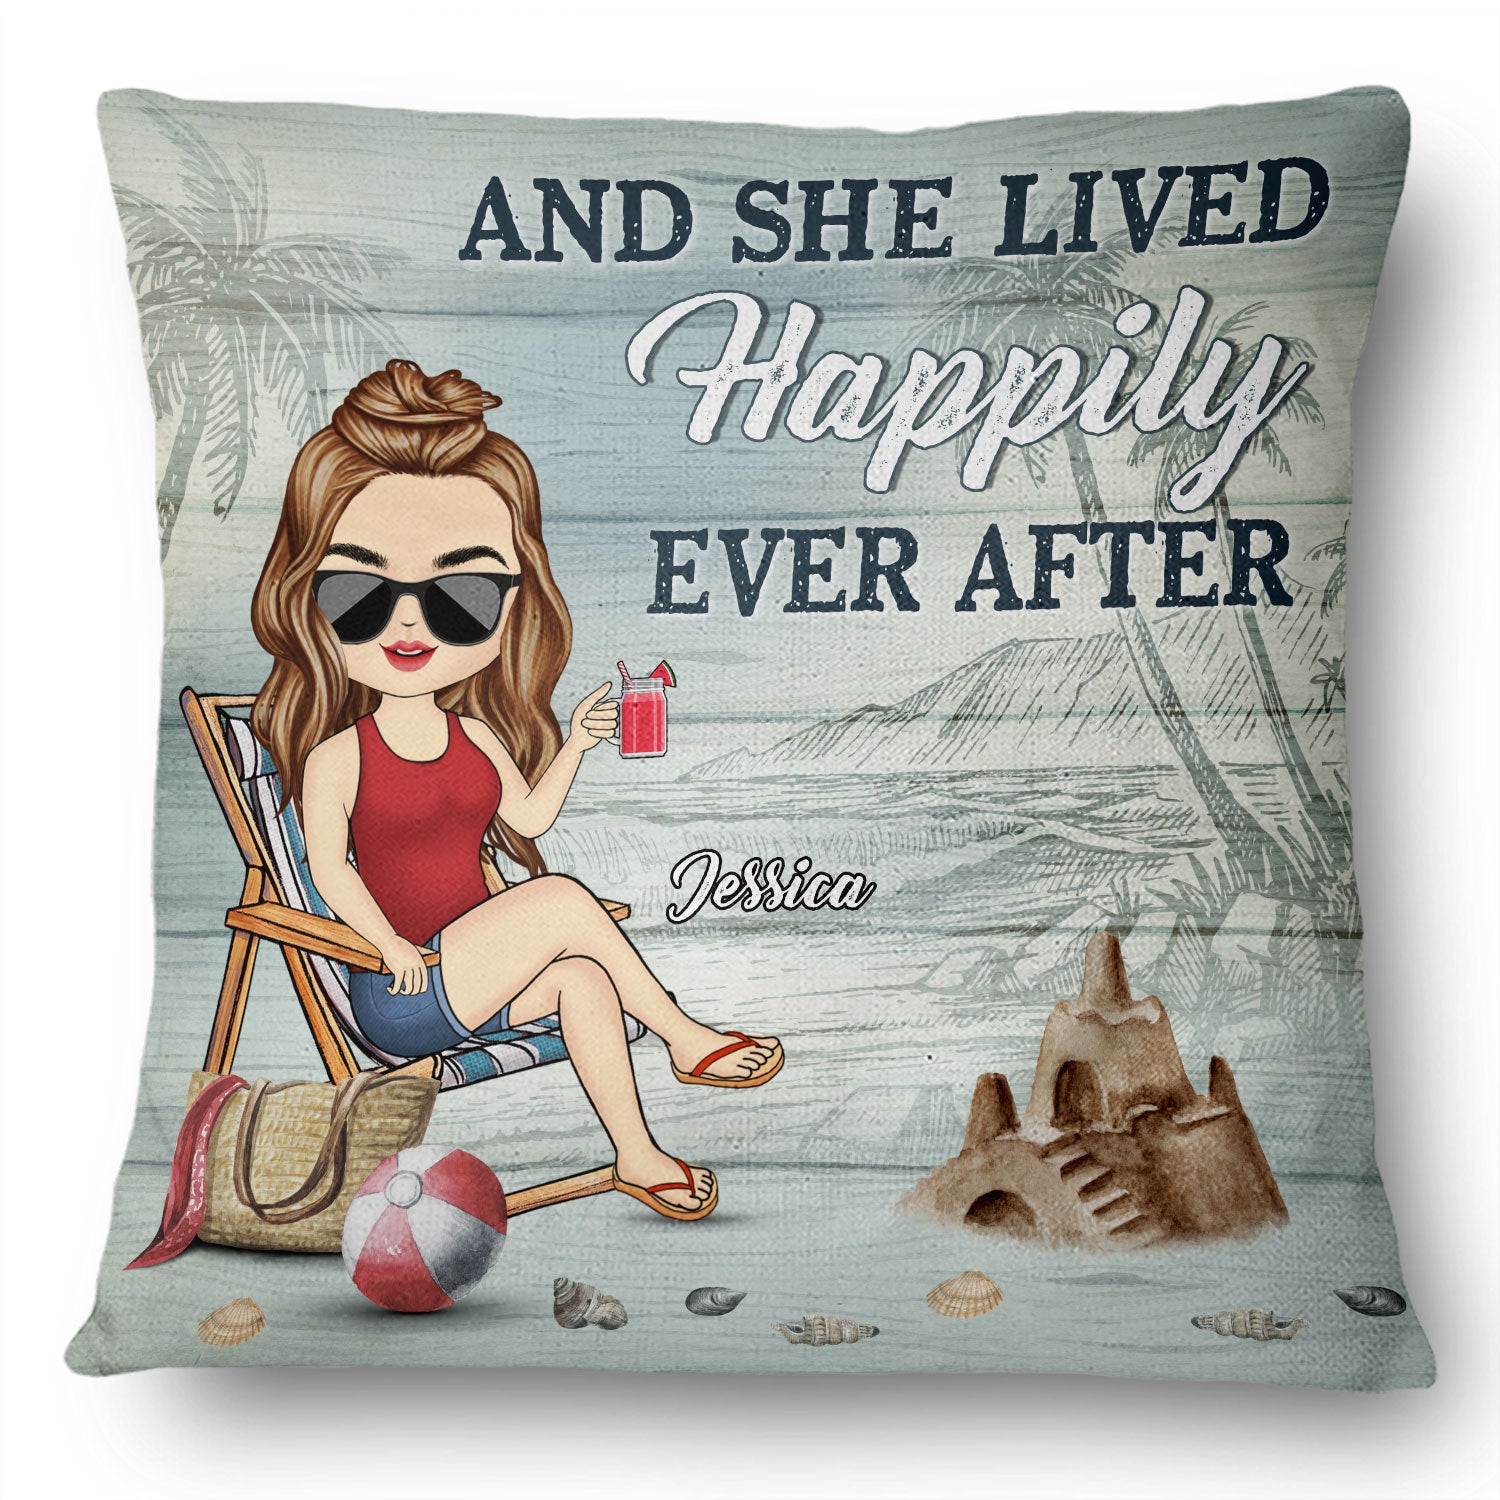 And She Lived Happily Ever After Beach Summer Vibe - Gift For Her, Yourself, Girlfriend, BFF Best Friends, Sister, Traveling Lovers - Personalized Custom Pillow